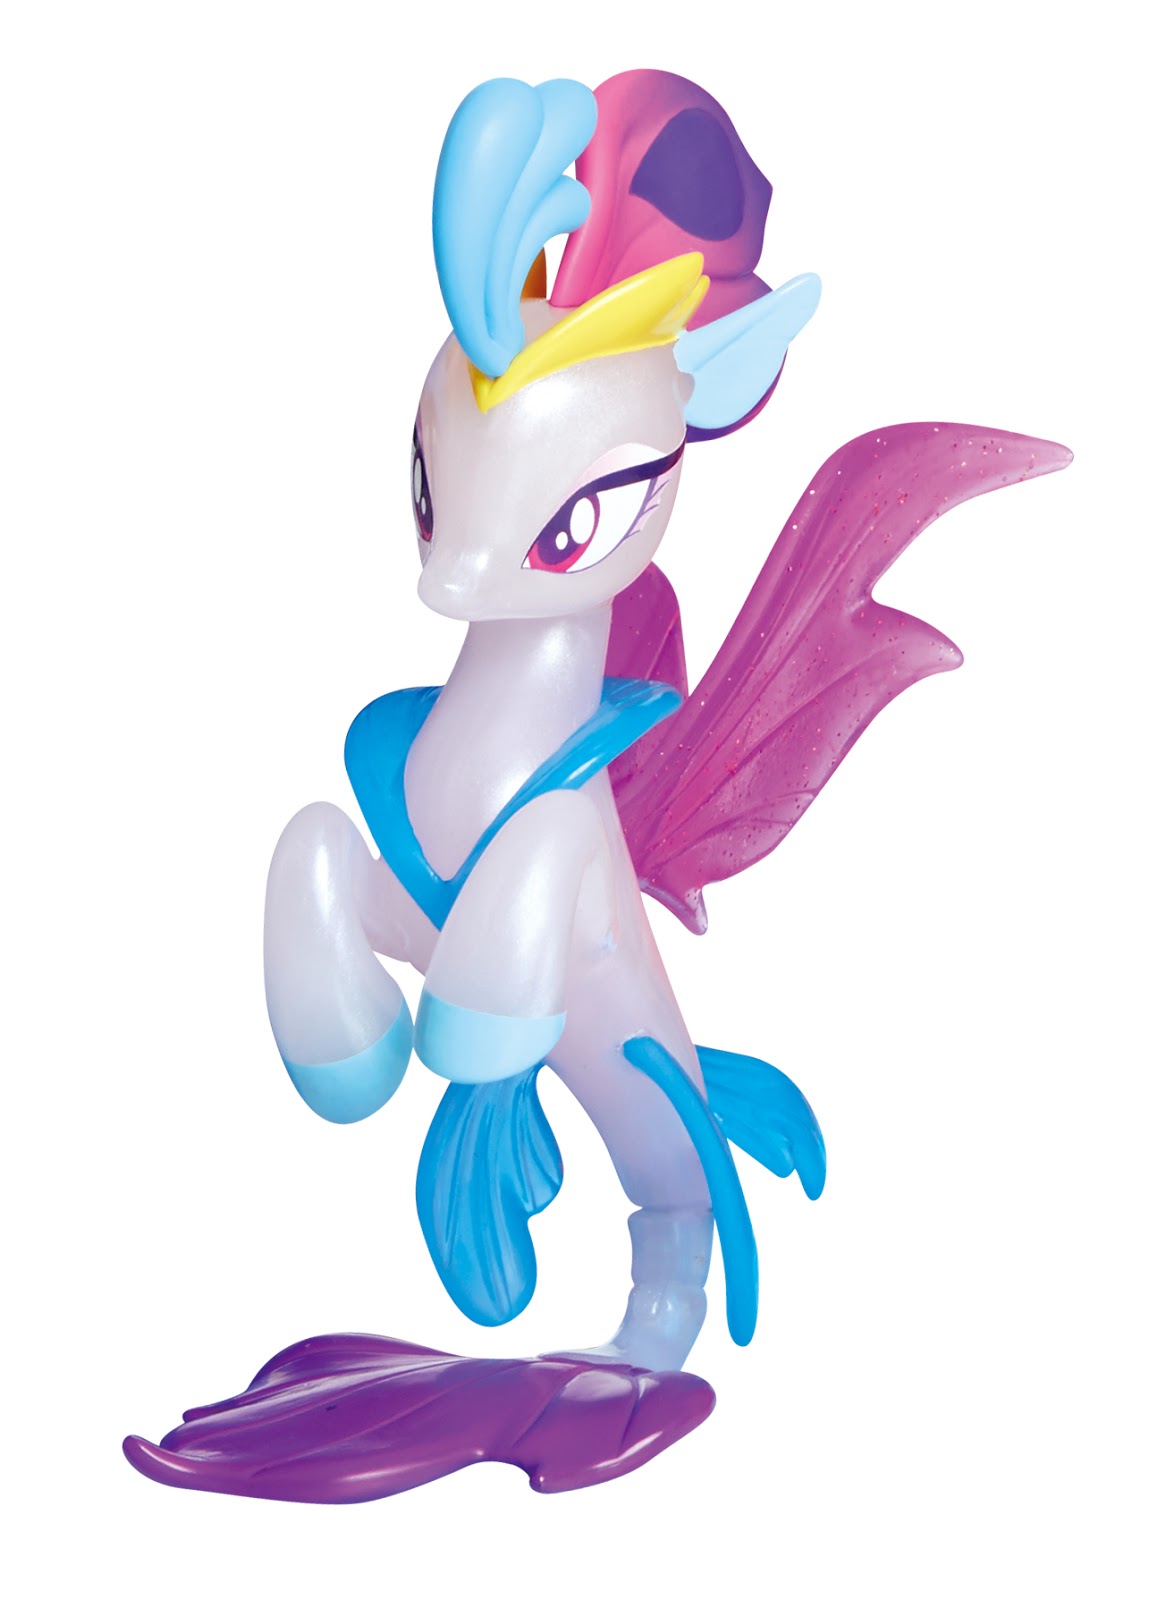 http://vignette2.wikia.nocookie.net/mlp/images/2/21/My_Little_Pony_The_Movie_Queen_Novo_figure.jpg/revision/latest?cb=20170216180656